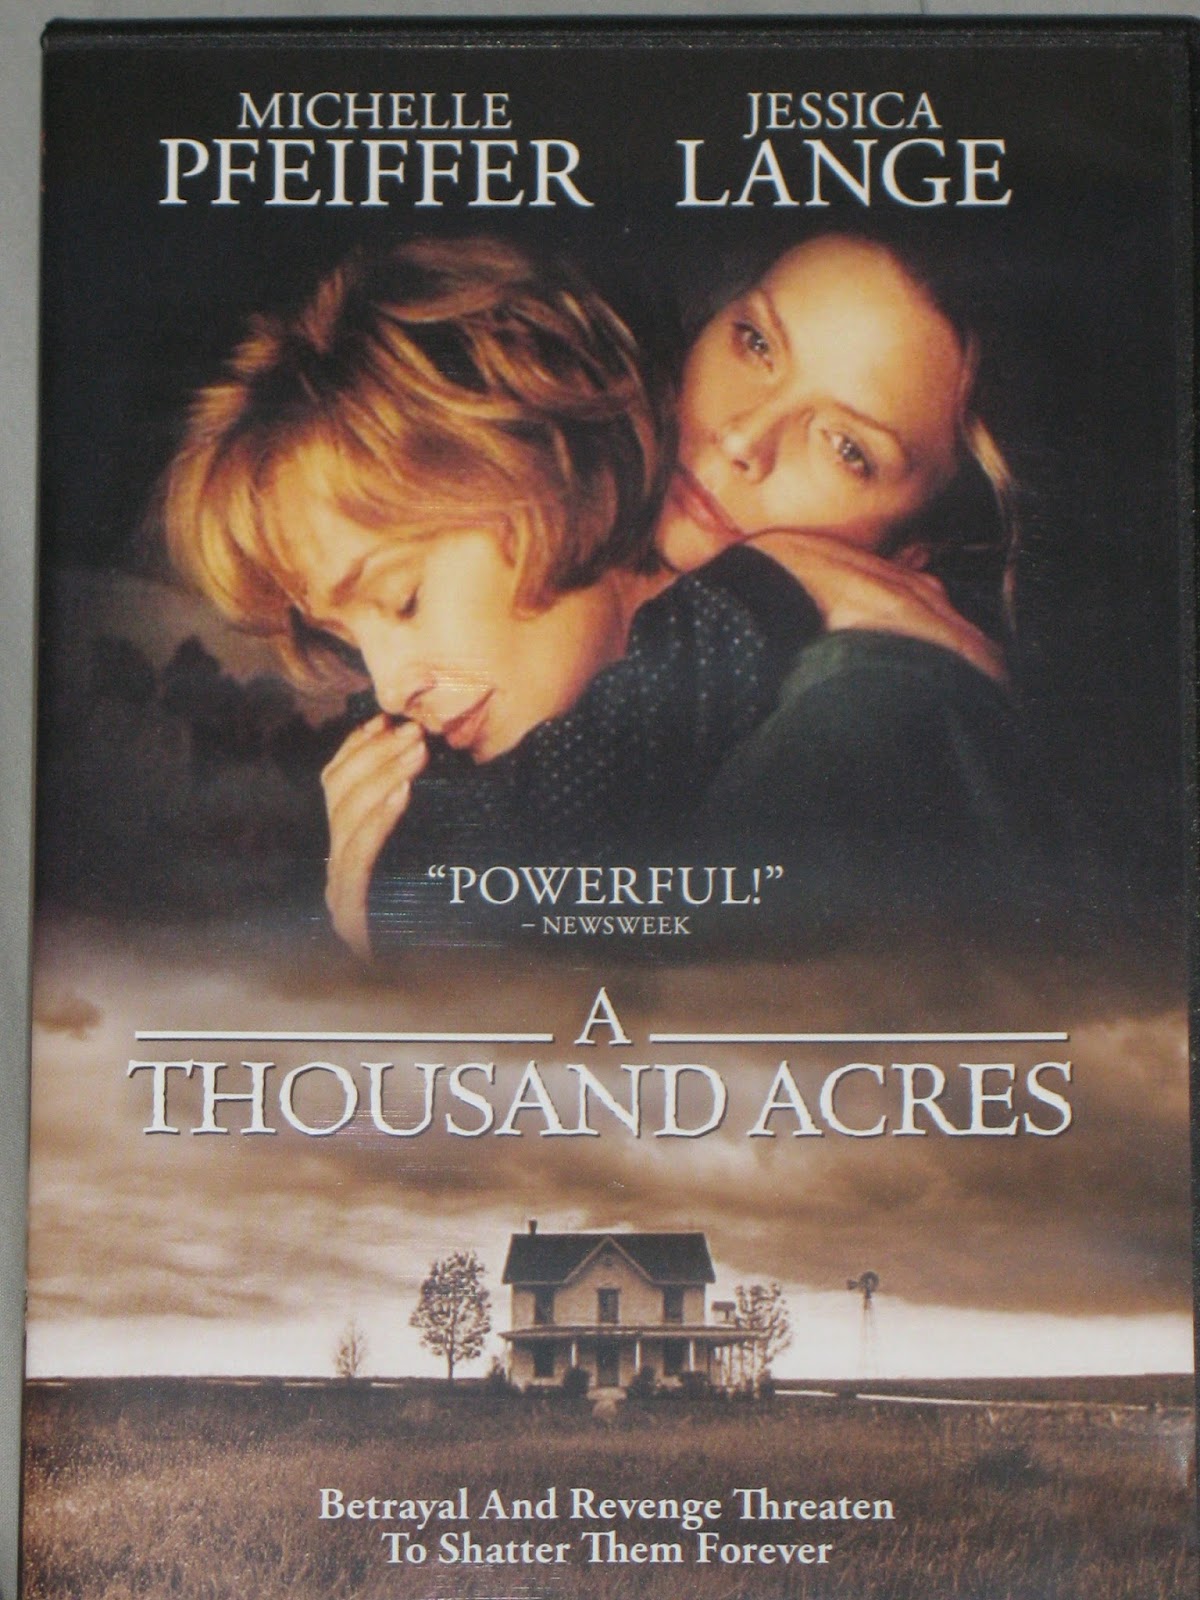 A Thousand Acres as Movie is Melodramatic